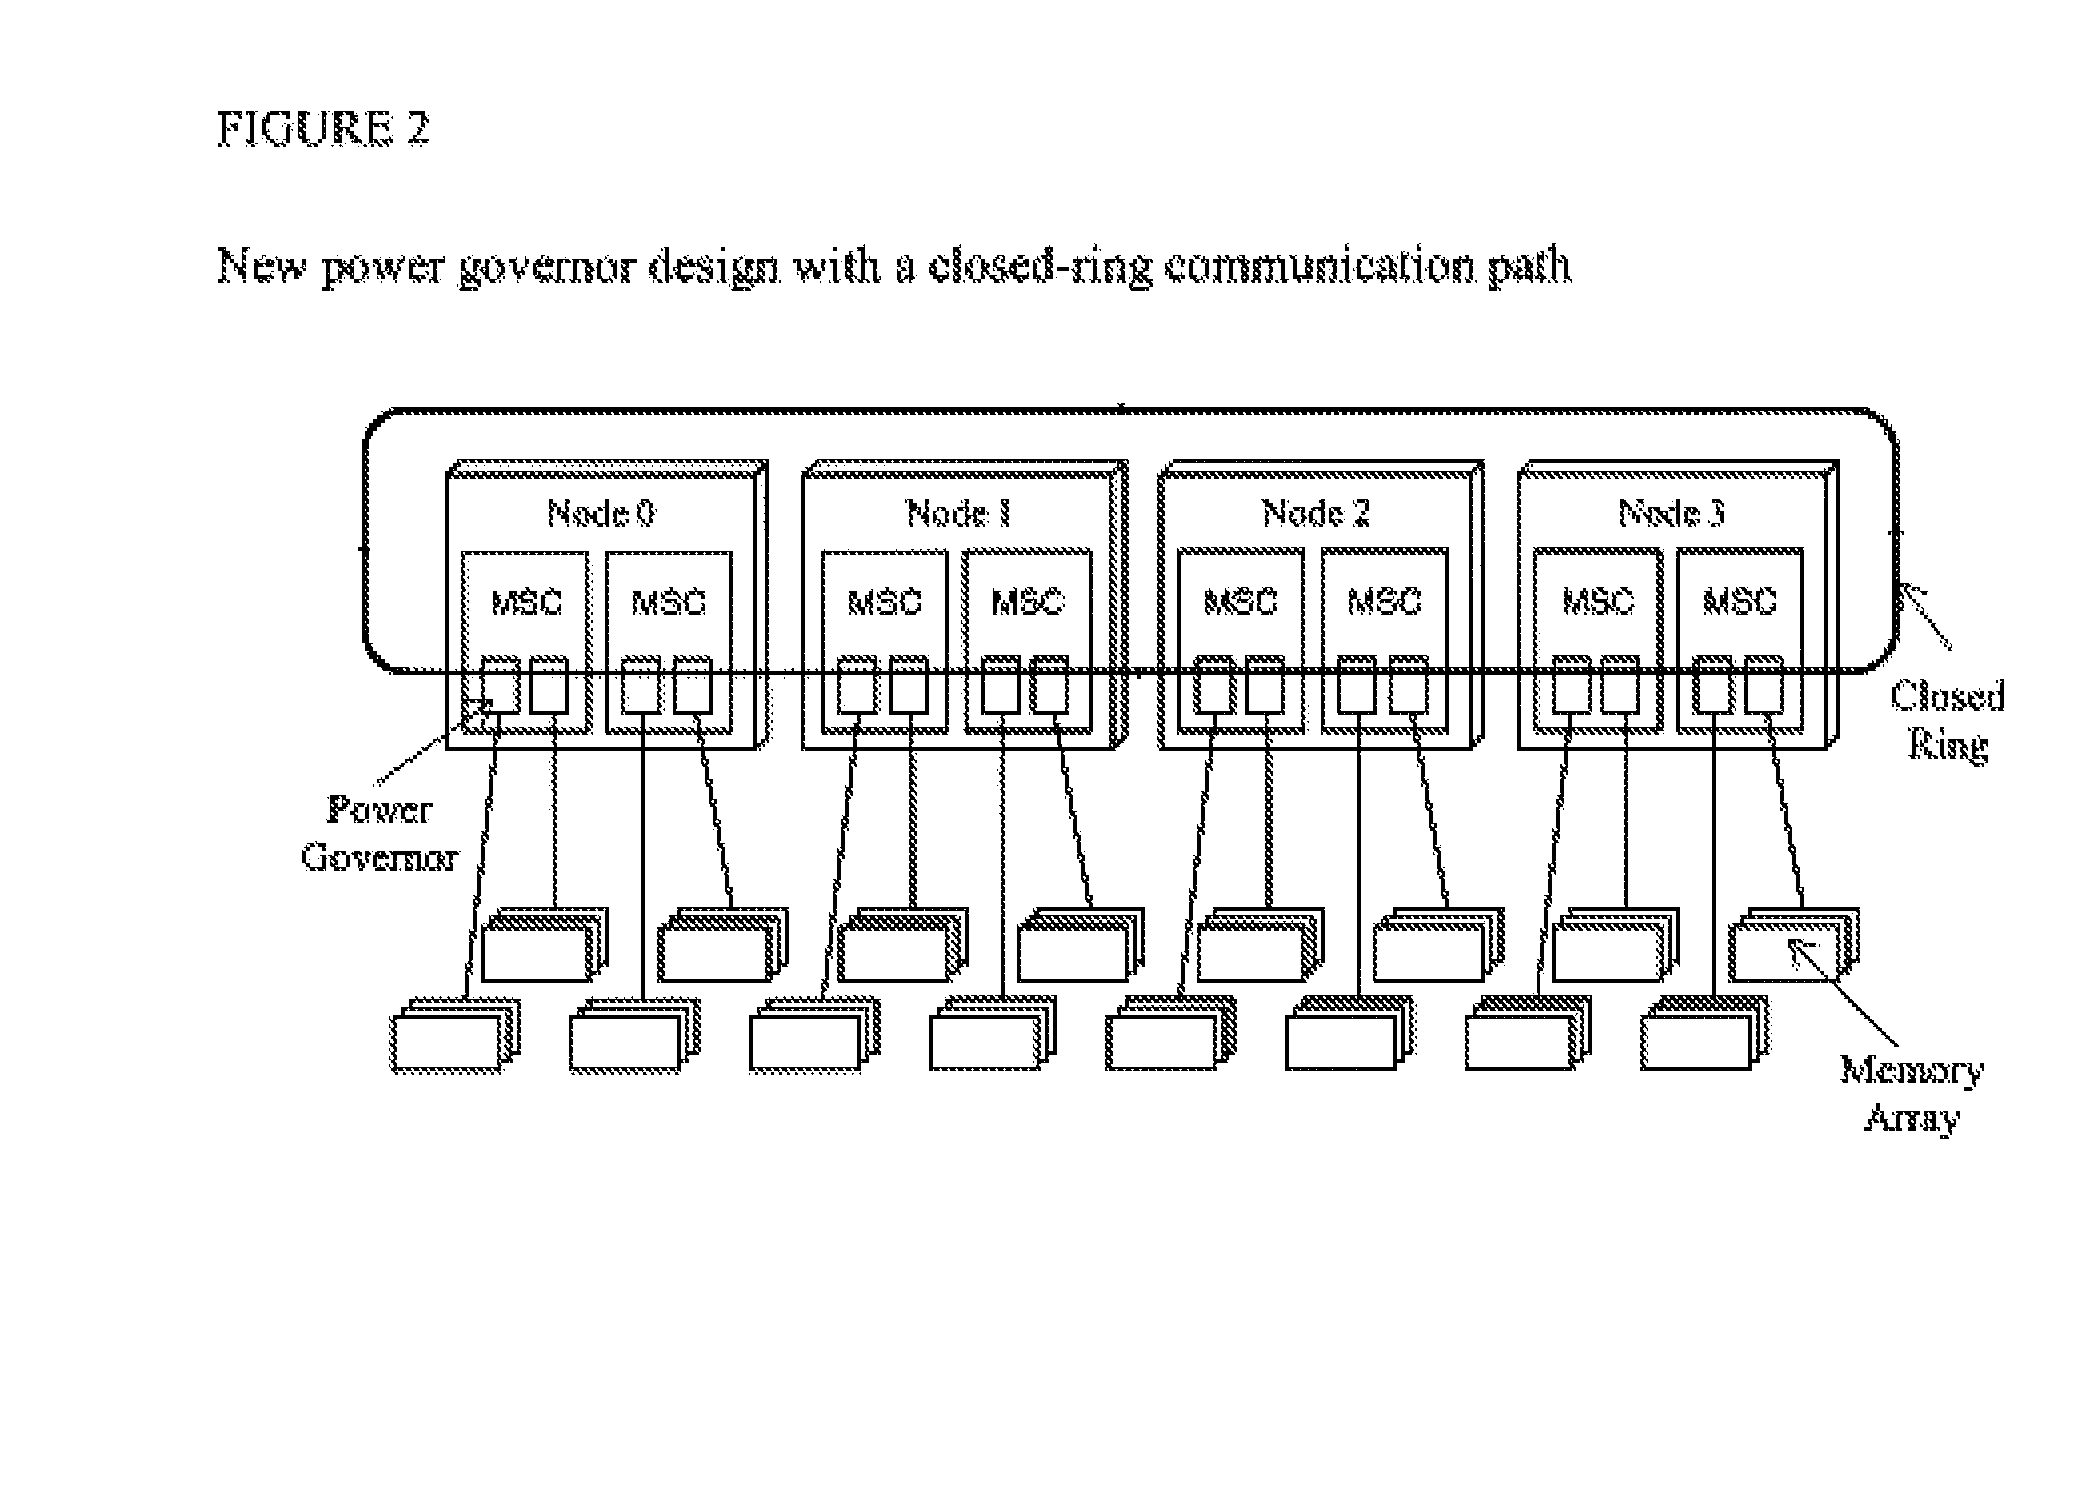 Method for Regulating System Power Using a Power Governor for DRAM in a Multi-Node Computer System